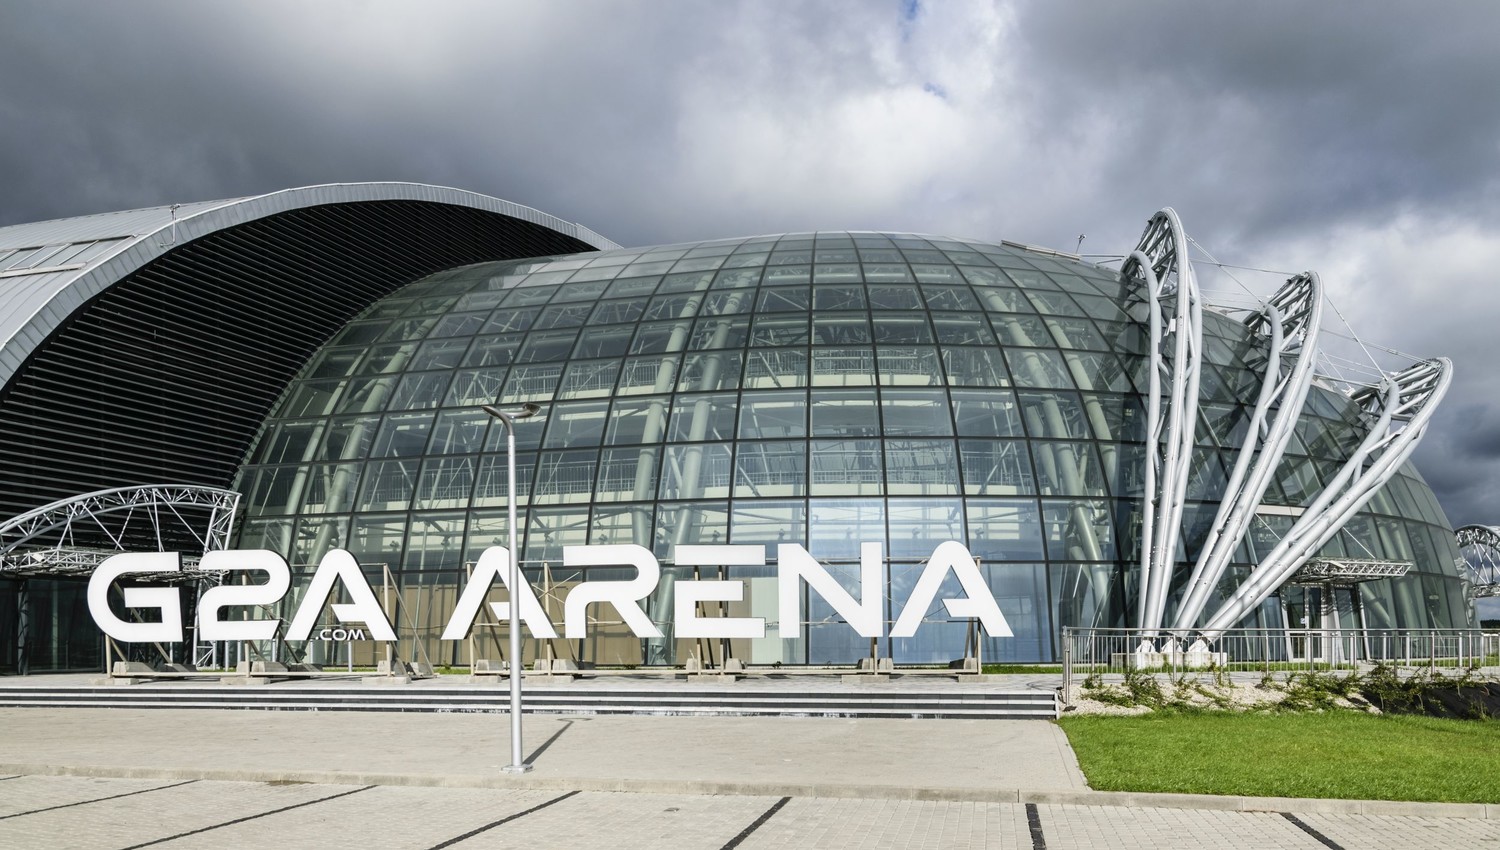 G2A Arena